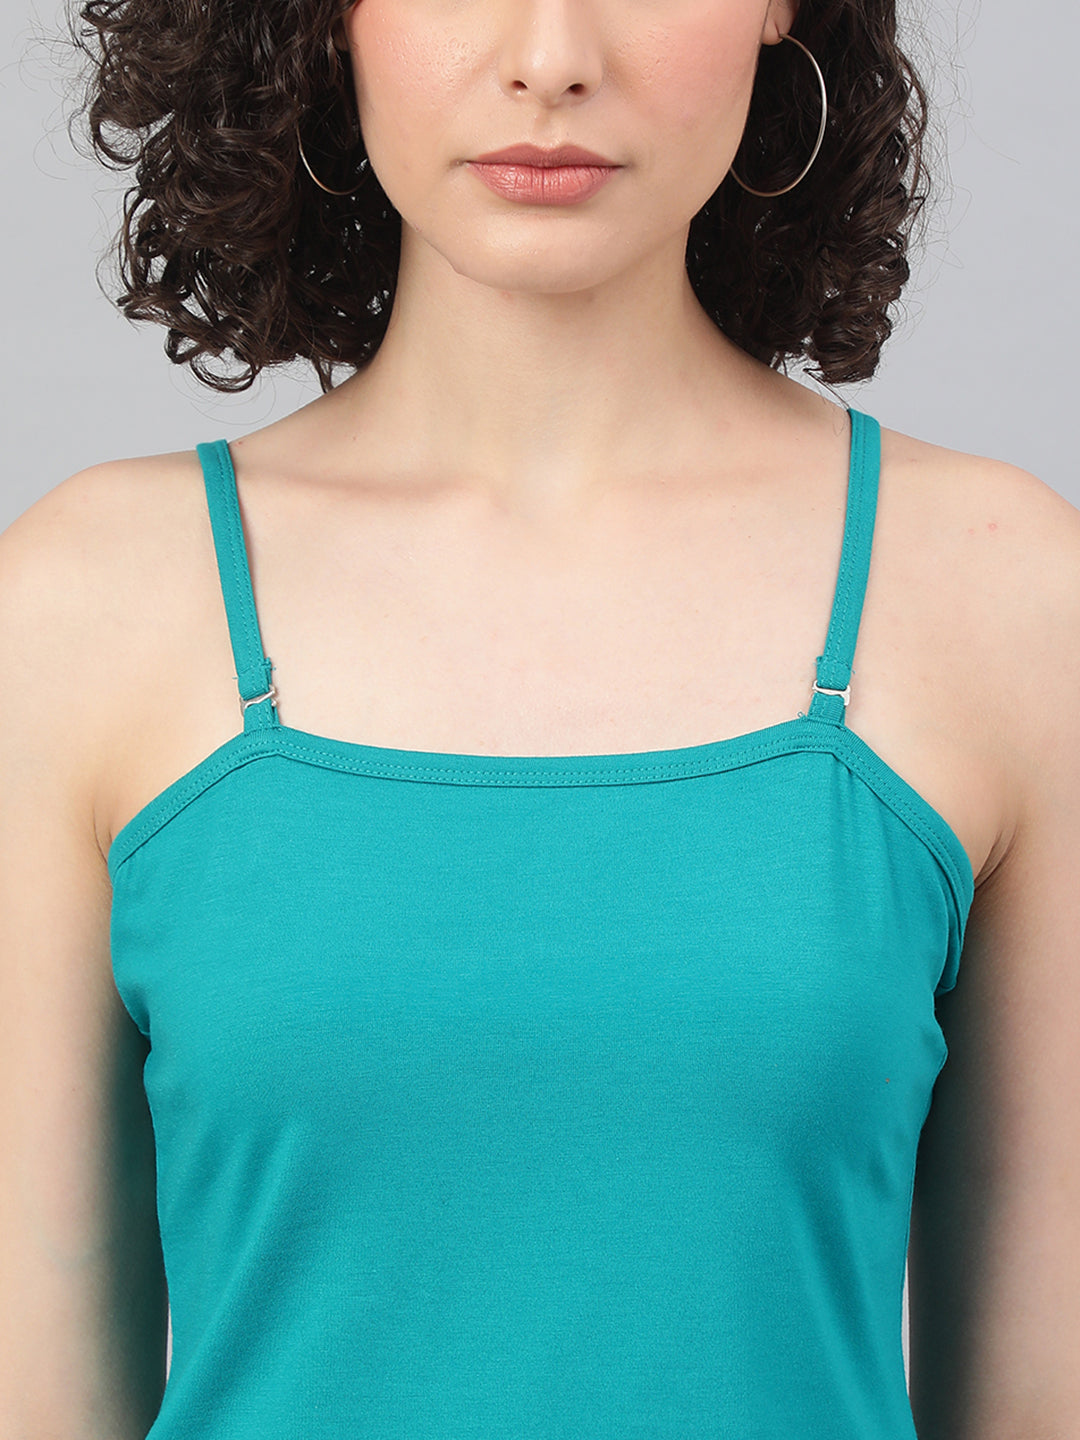 Stylish spaghetti top in Supima cotton - Teal/Sky Blue Cotton Top for Women - BeSimple